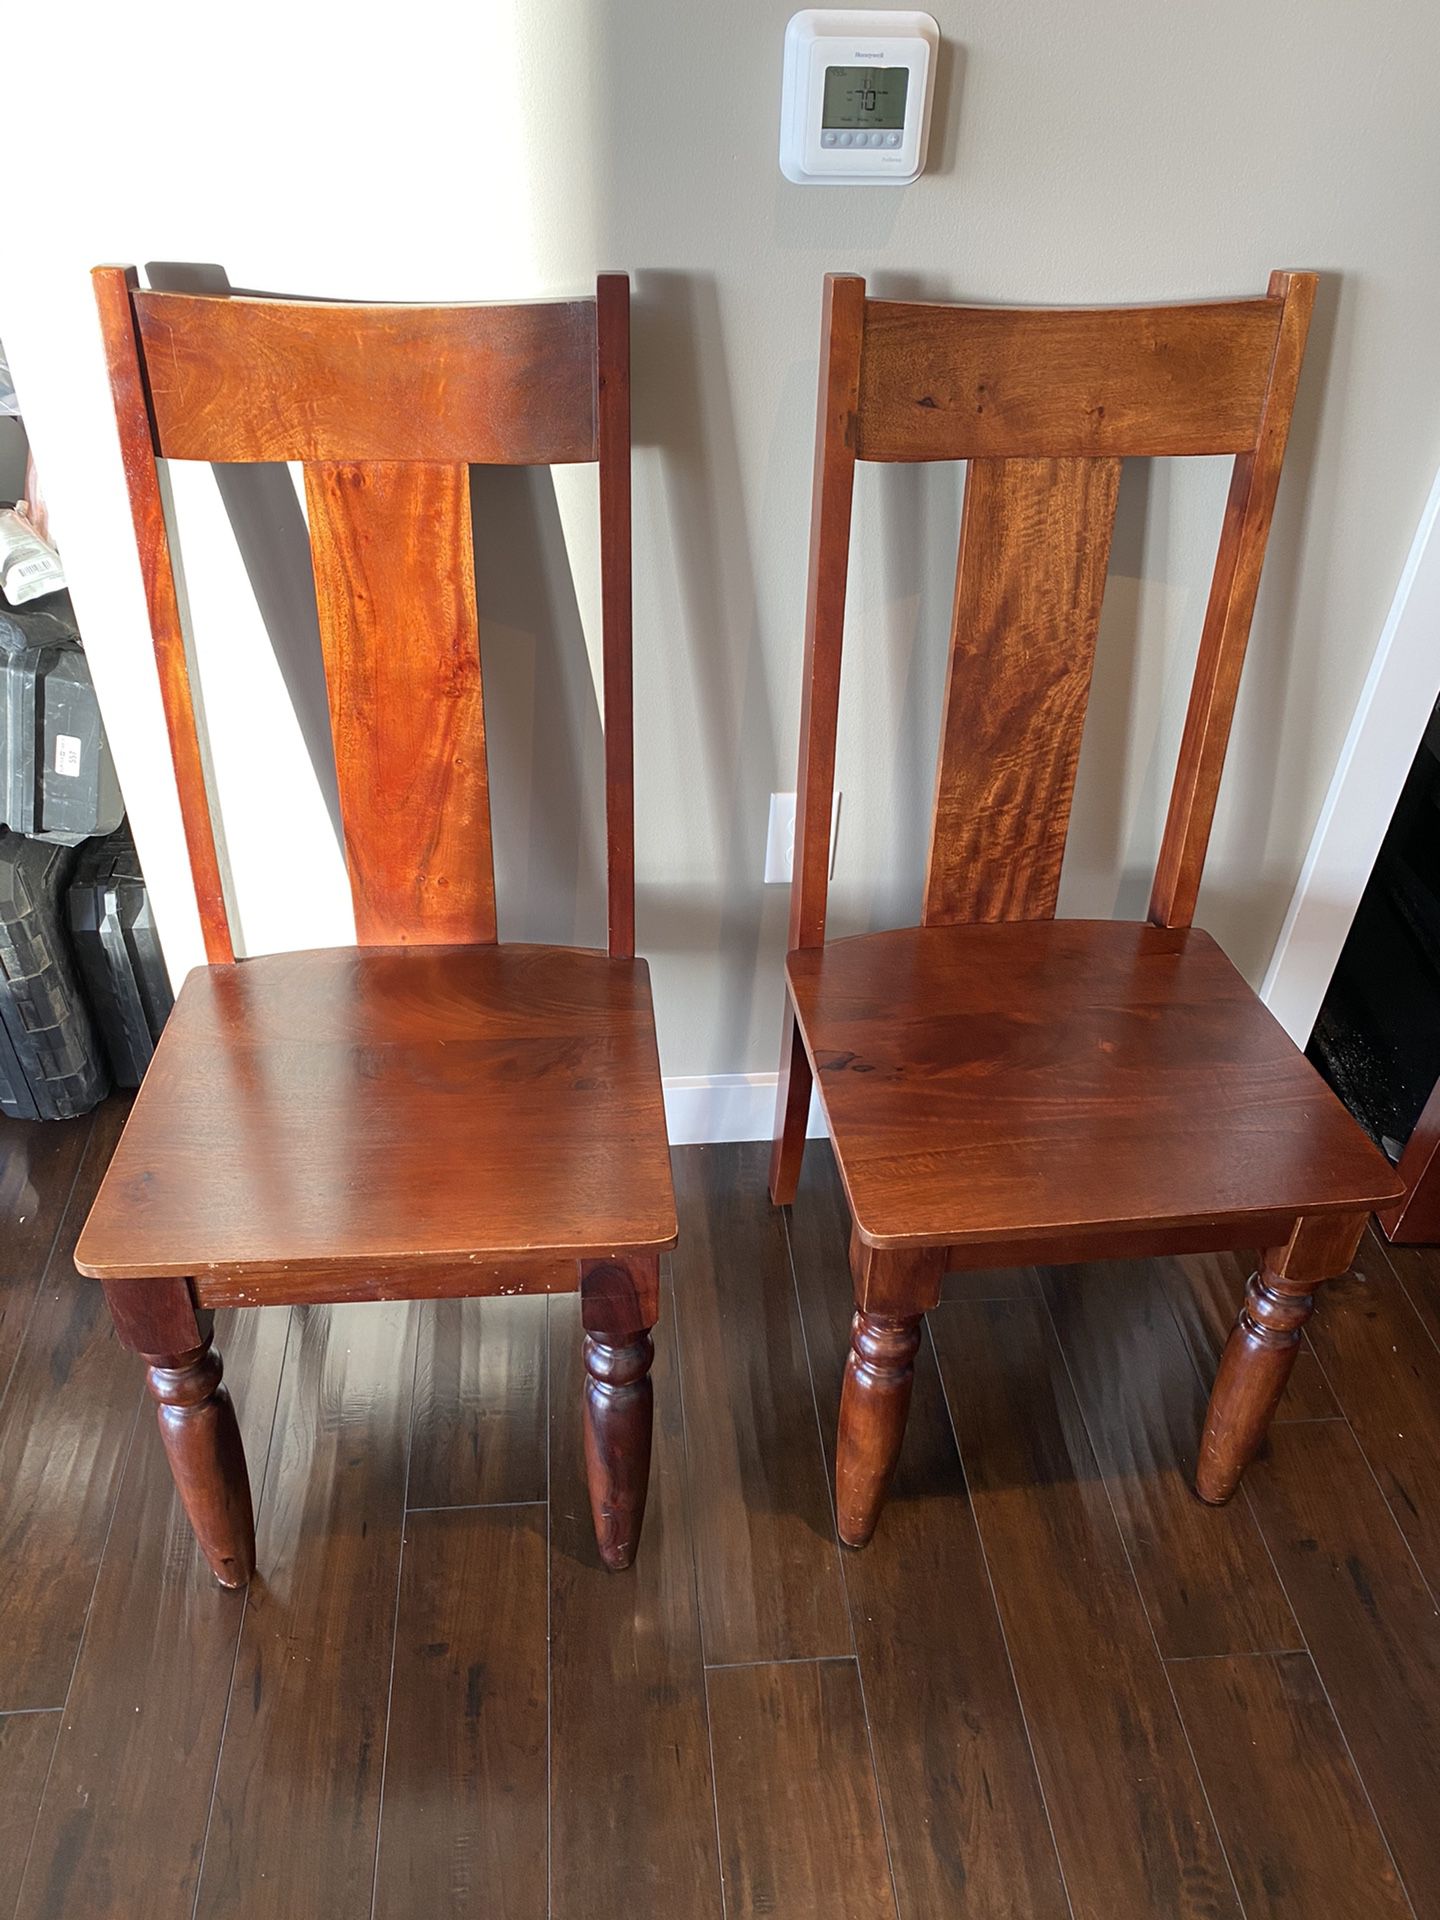 2 rubberwood chairs from World Market